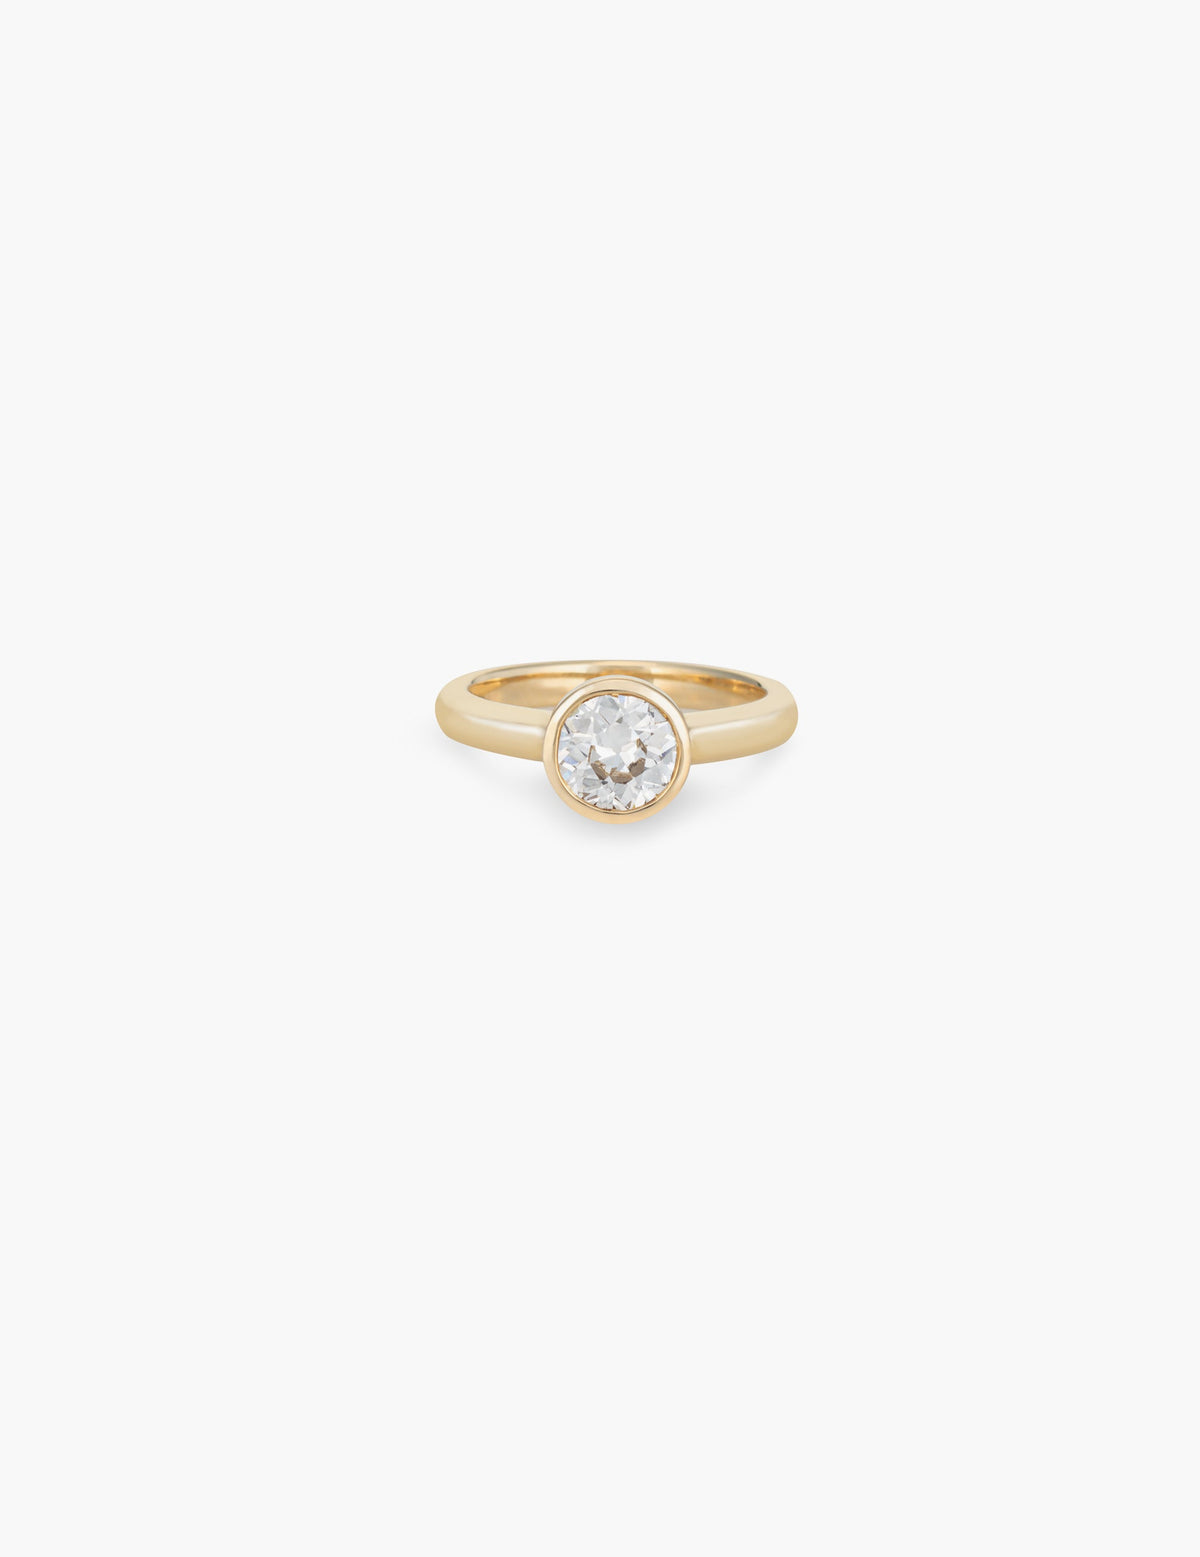 Jane Ring with 1.12ct Transitional Cut Diamond